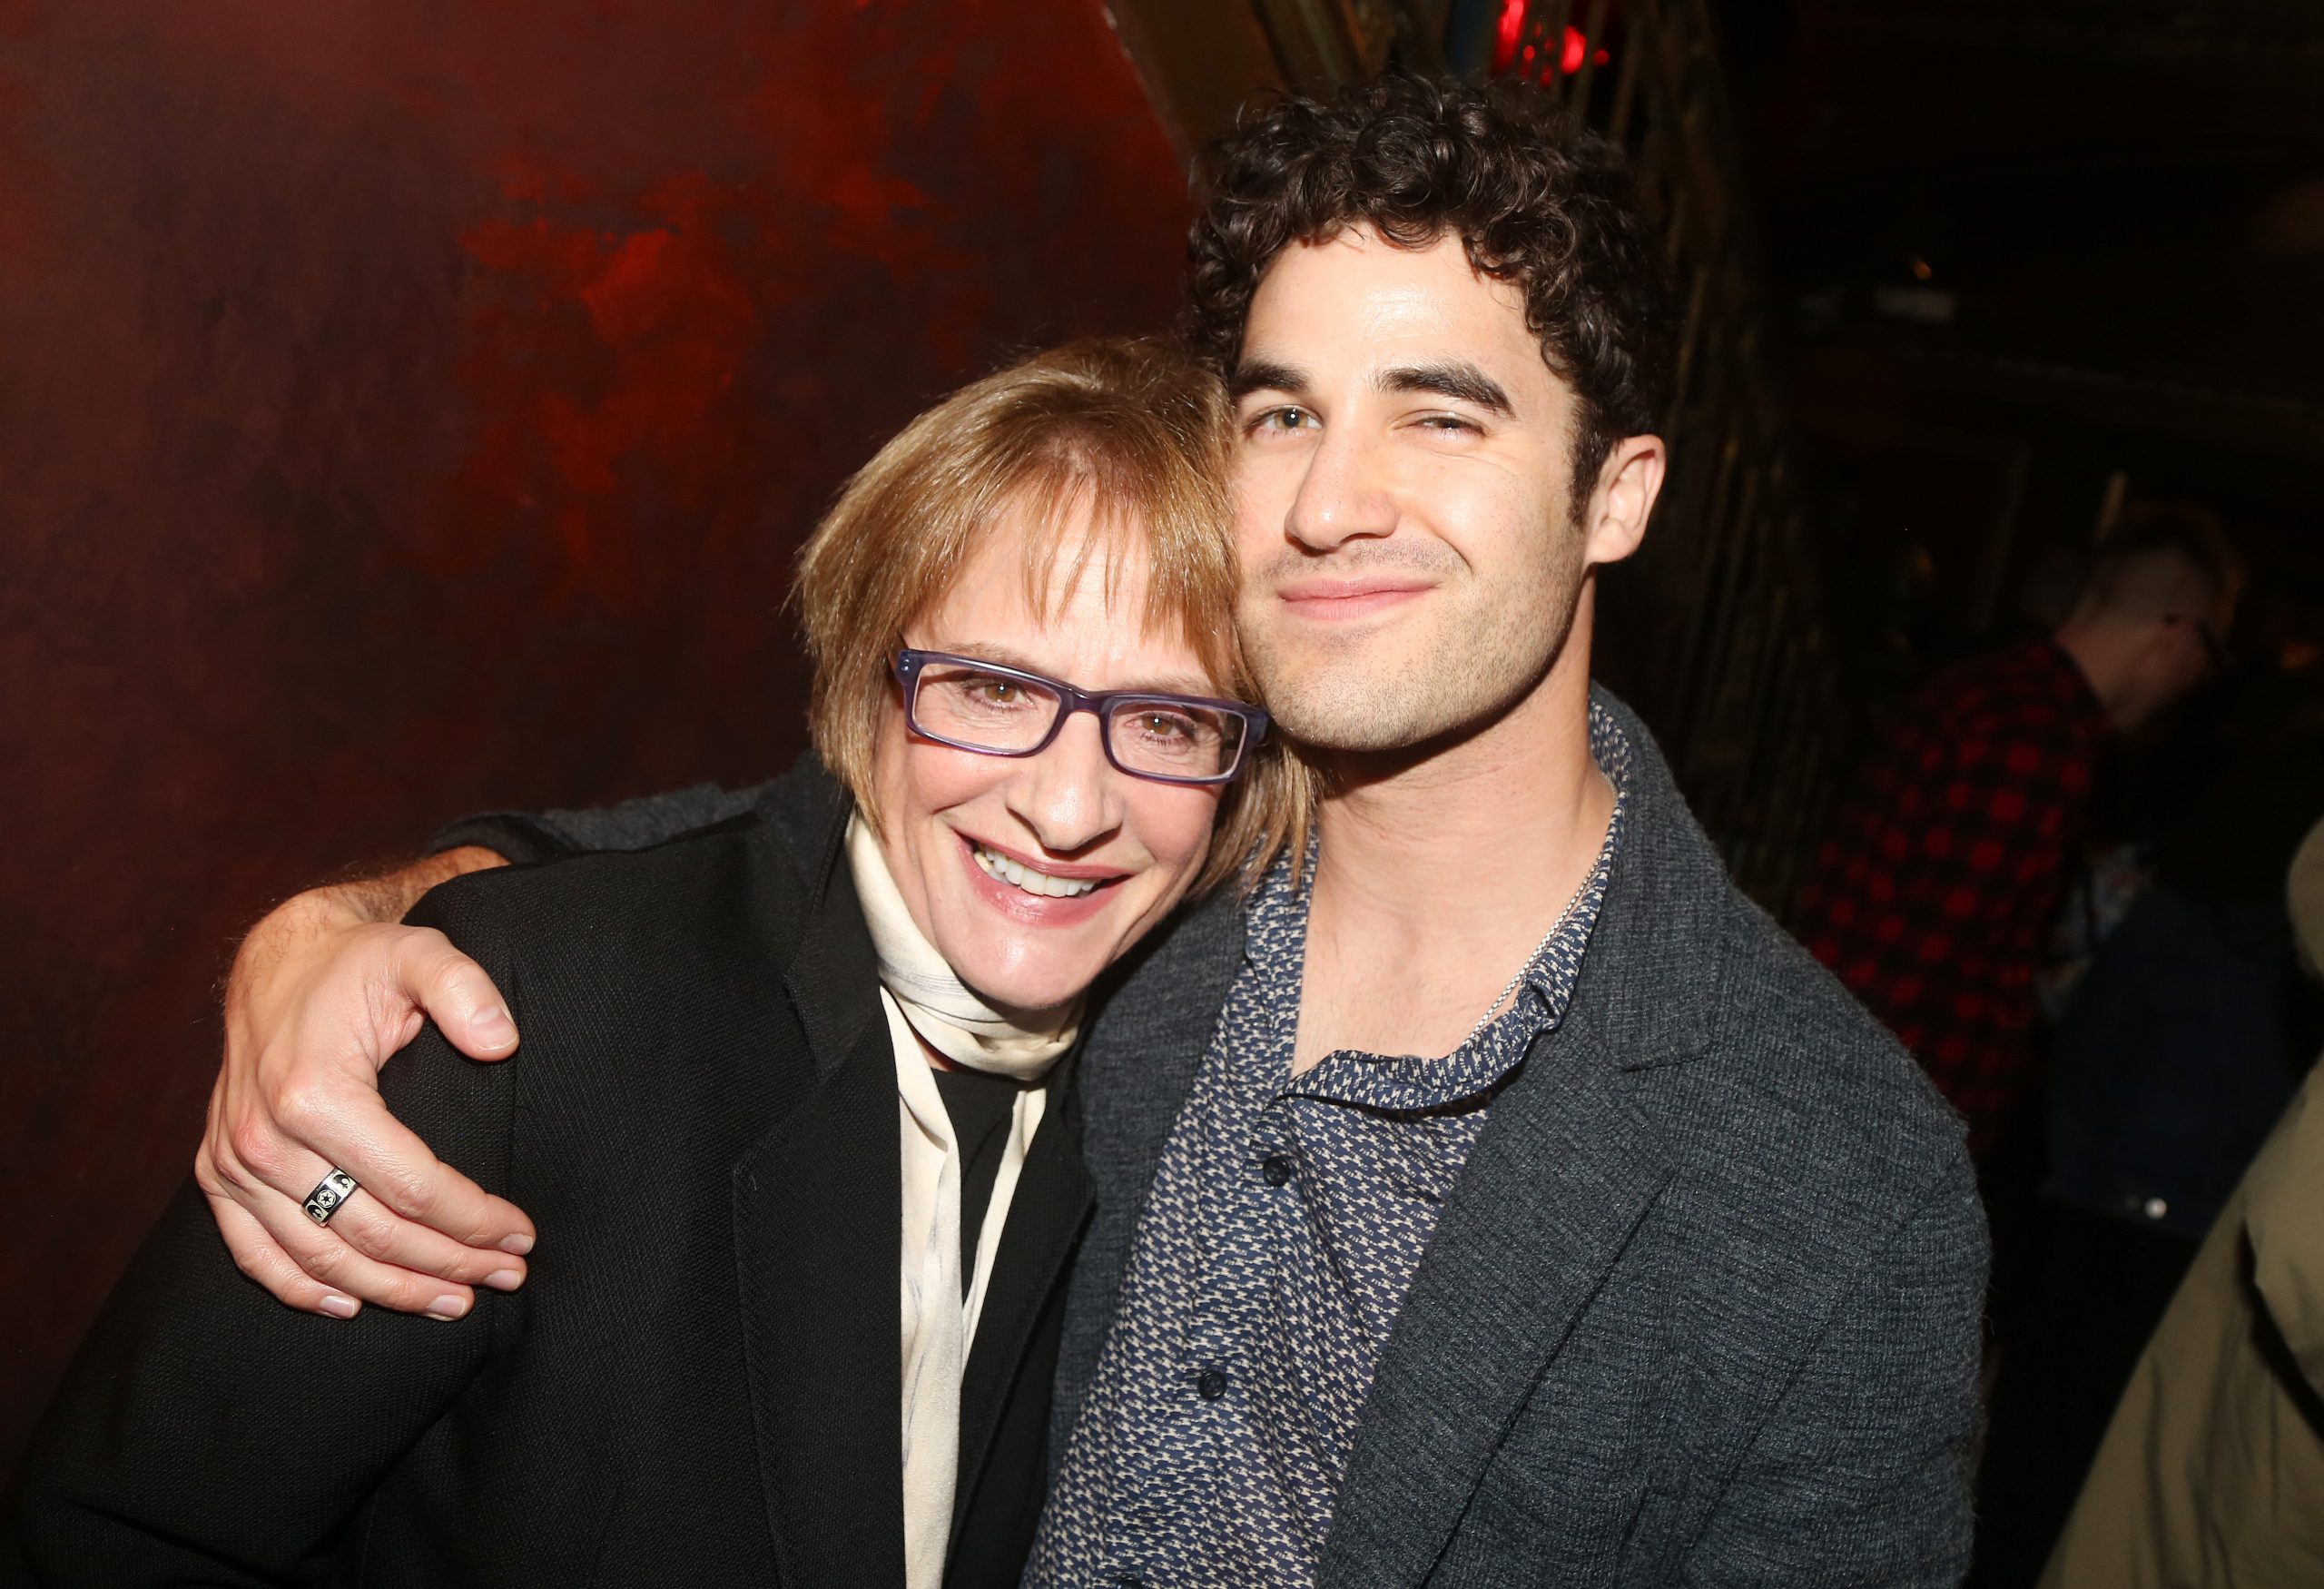 Patti LuPone with Darren Criss in New York City. (Photo by Bruce Glikas/WireImage)